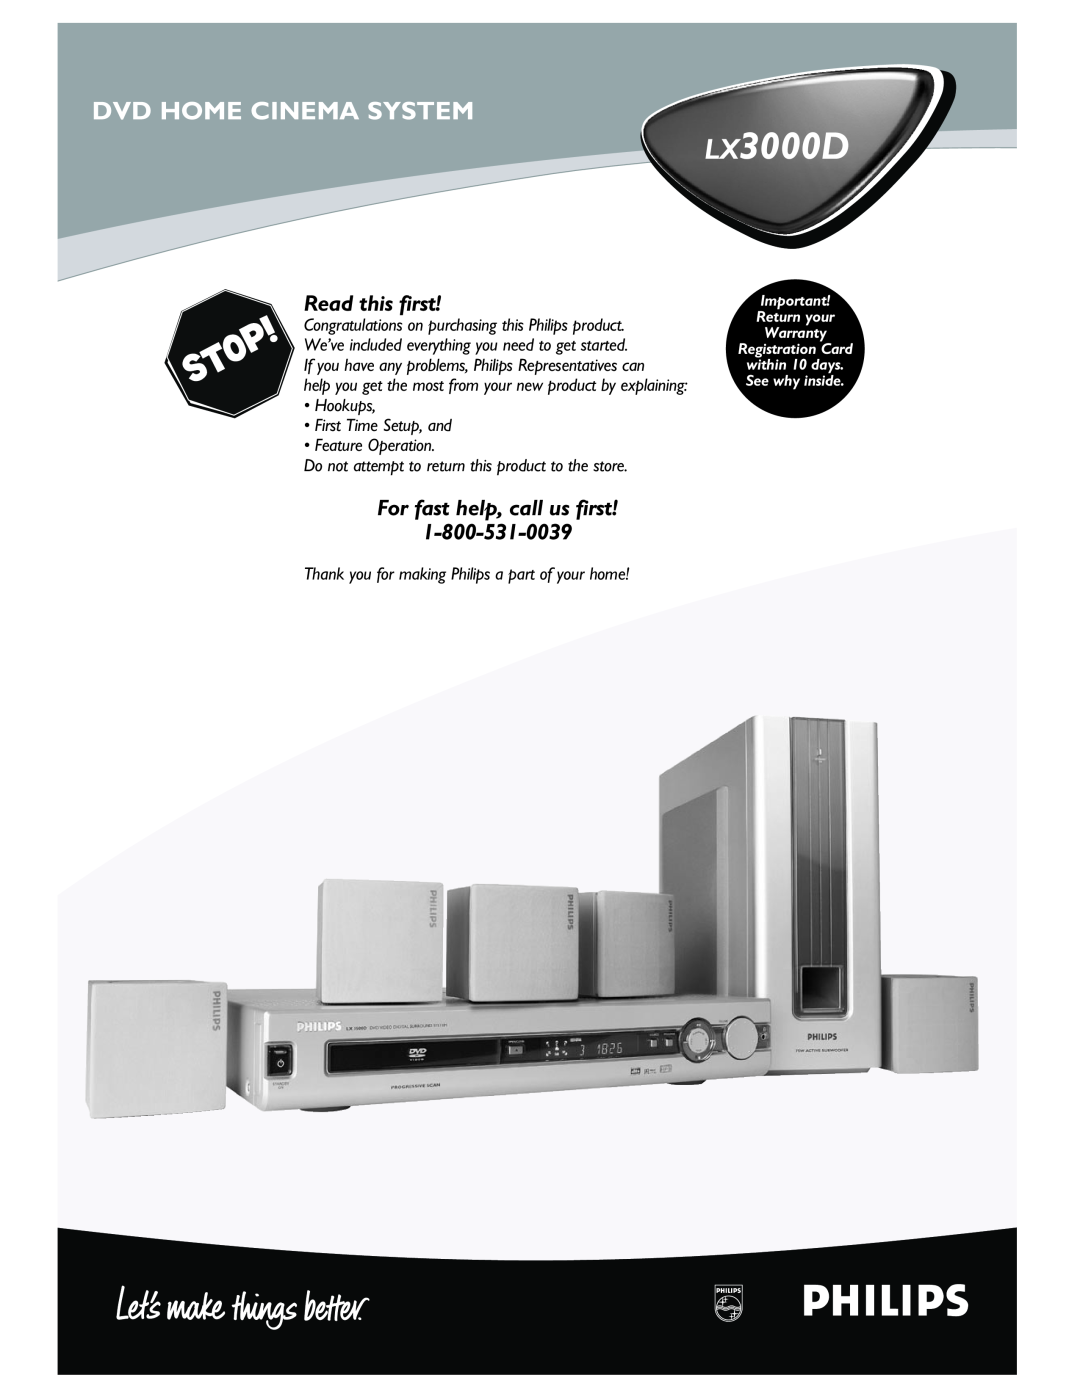 Philips warranty help you get the most from your new product by explaining, LX3000D, Dvd Home Cinema System 